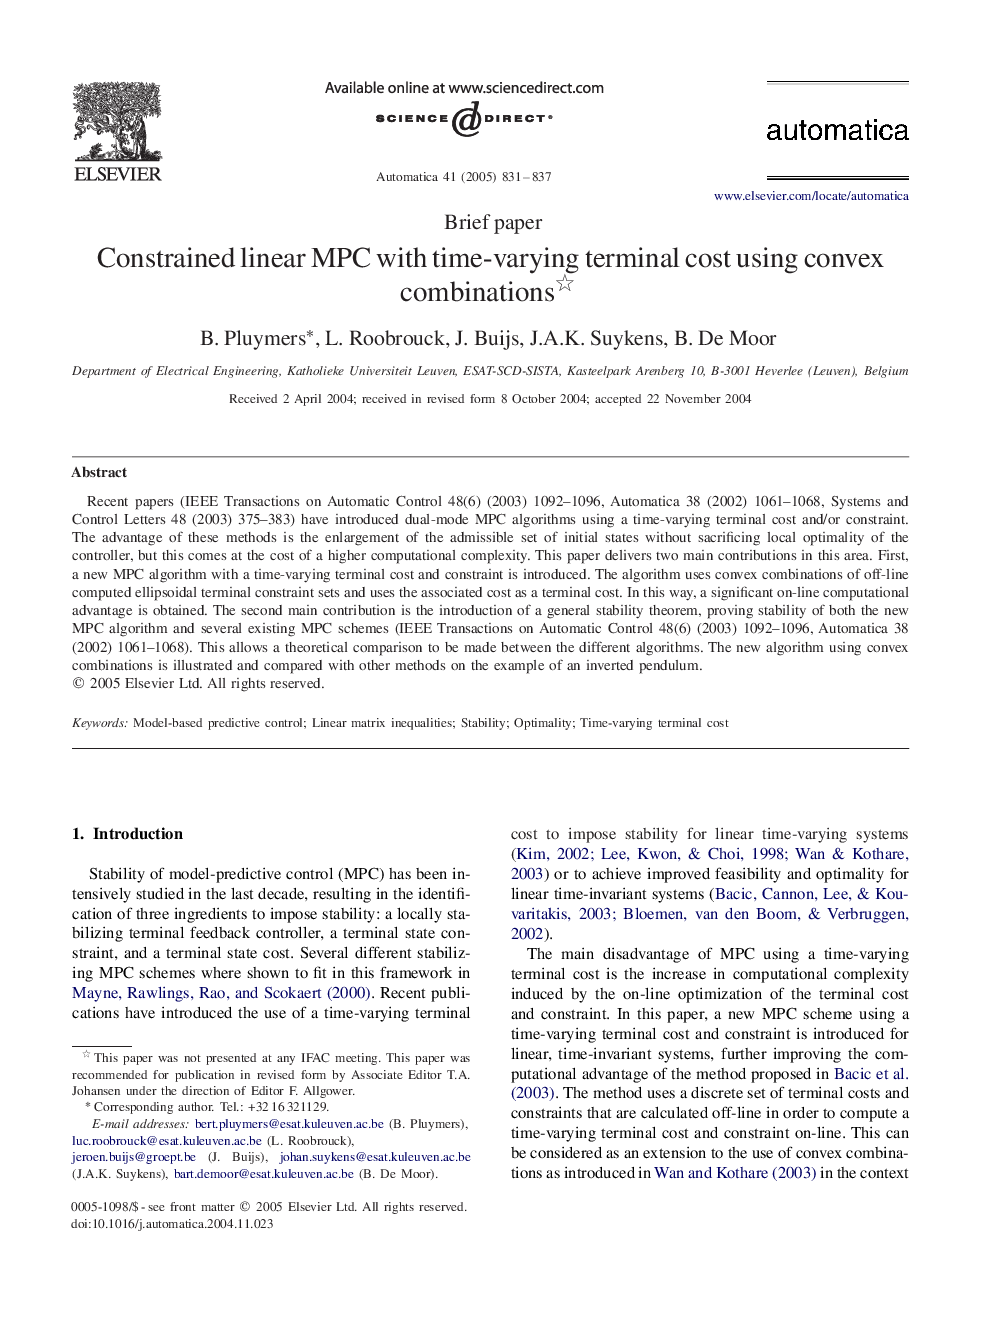 Constrained linear MPC with time-varying terminal cost using convex combinations